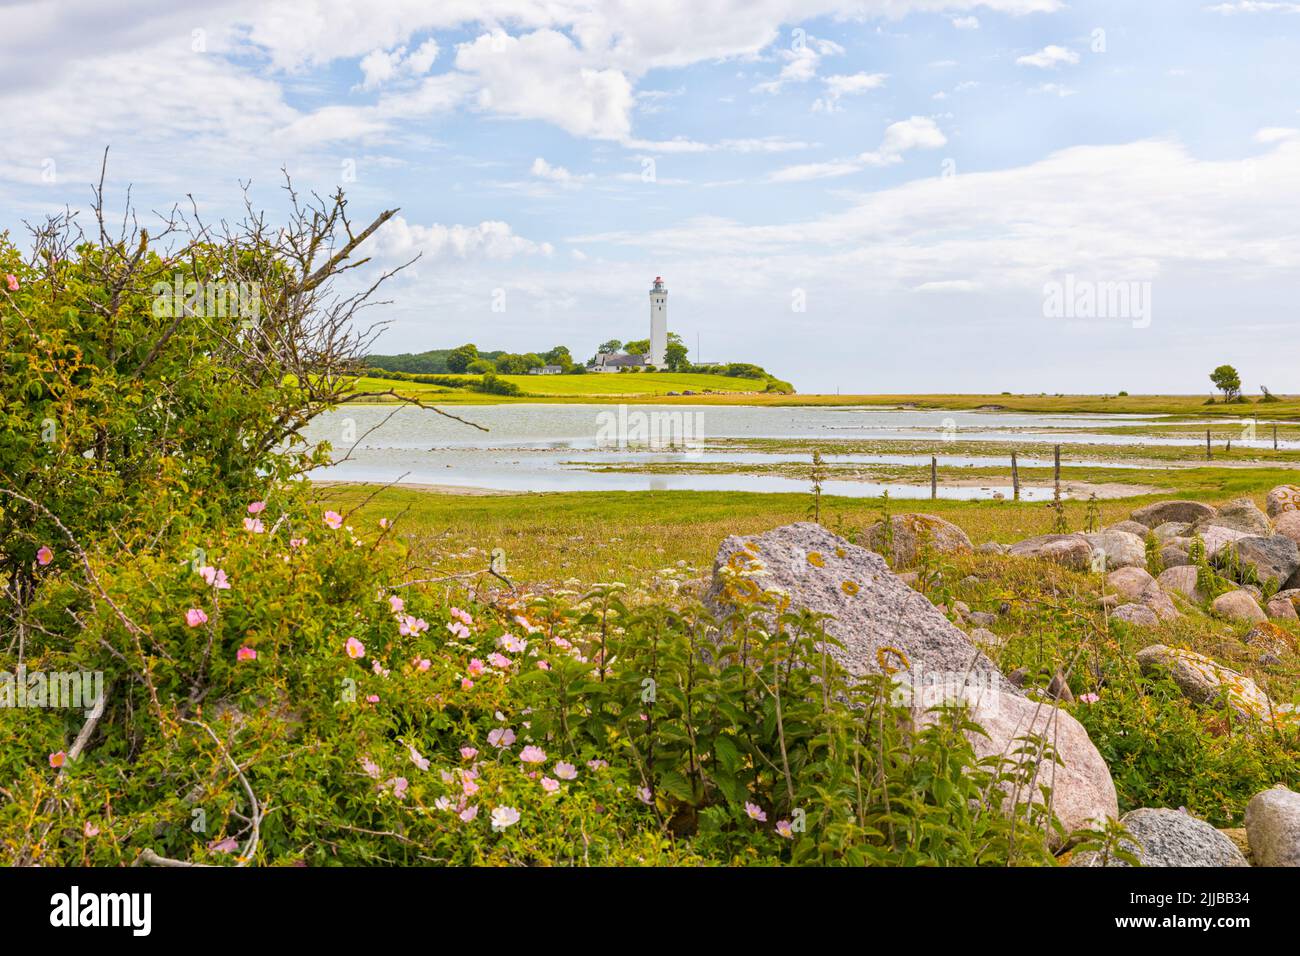 Keldsnor lake and lighthouse in the south of Baltic Sea island of Langeland, Denmark Stock Photo